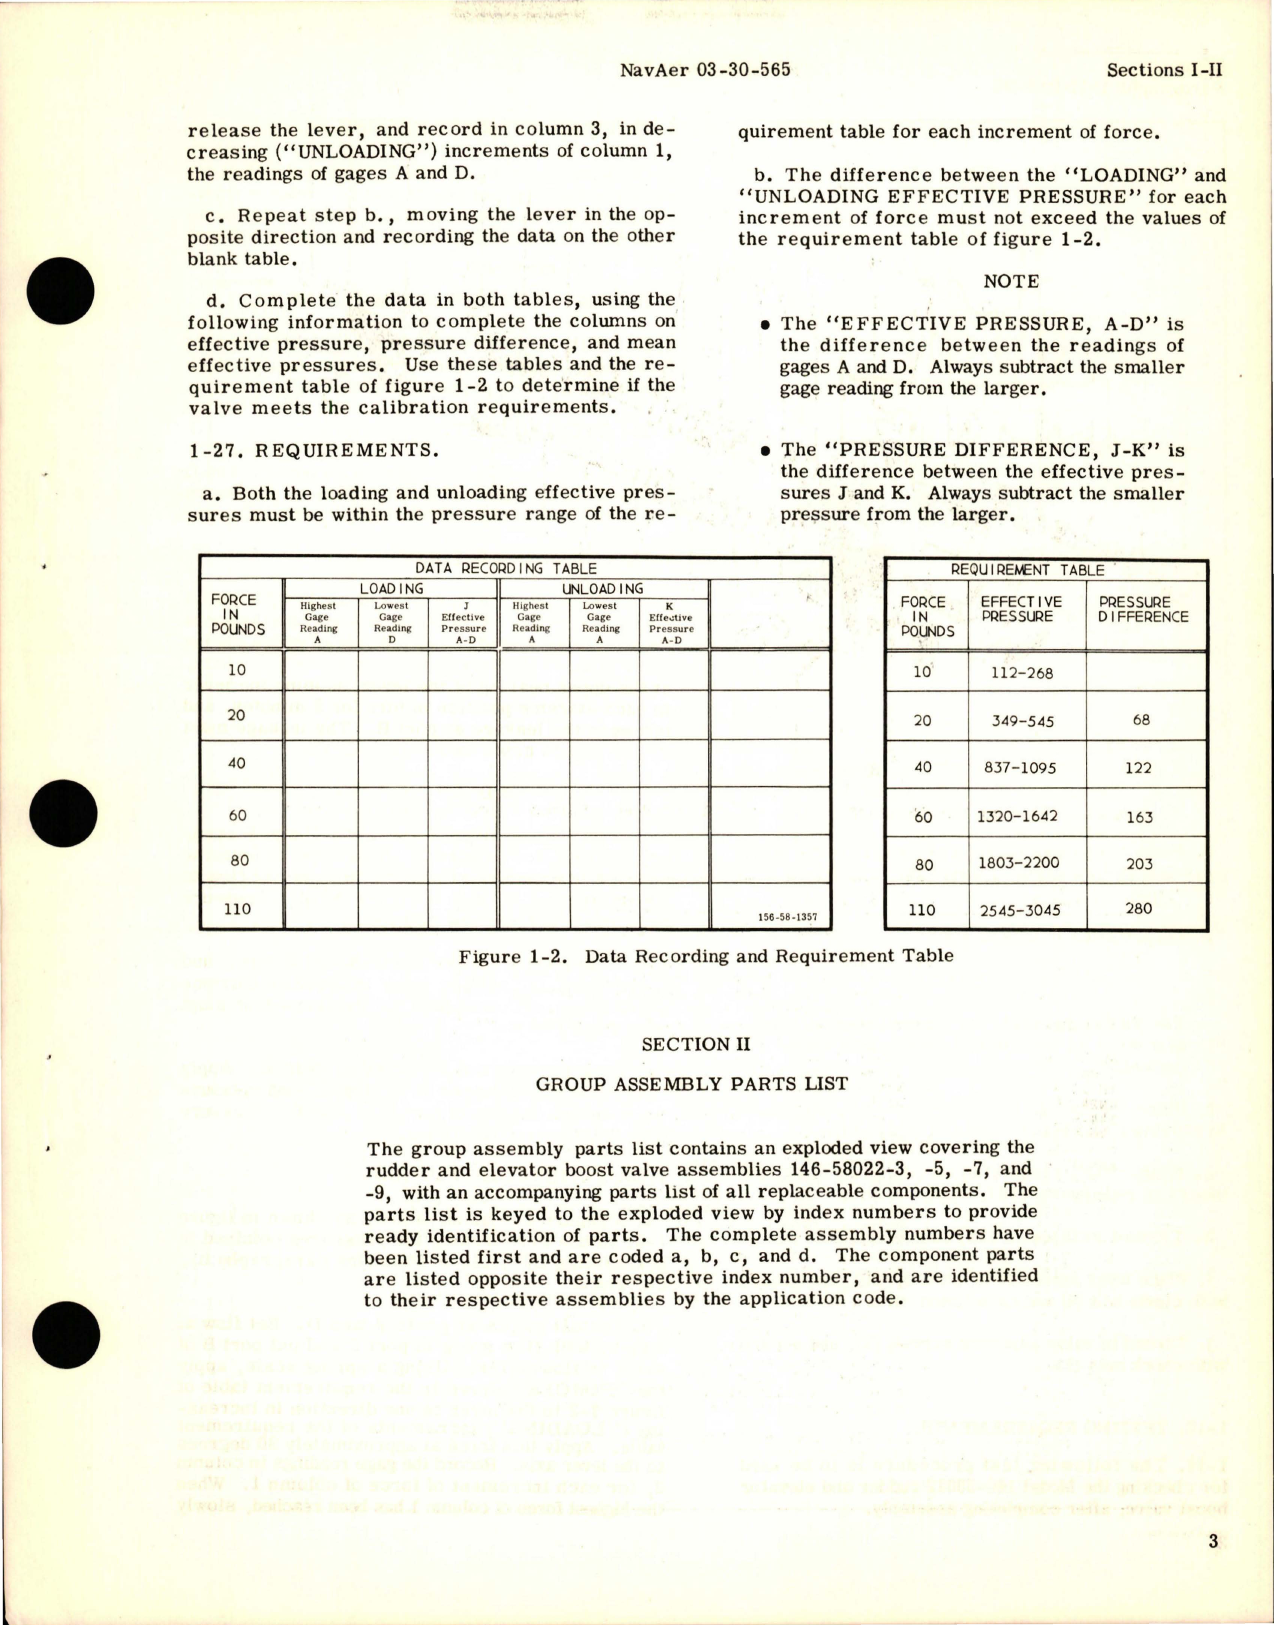 Sample page 5 from AirCorps Library document: Overhaul Instructions with Parts Catalog for Hydraulic Rudder & Elevator Boost Valves